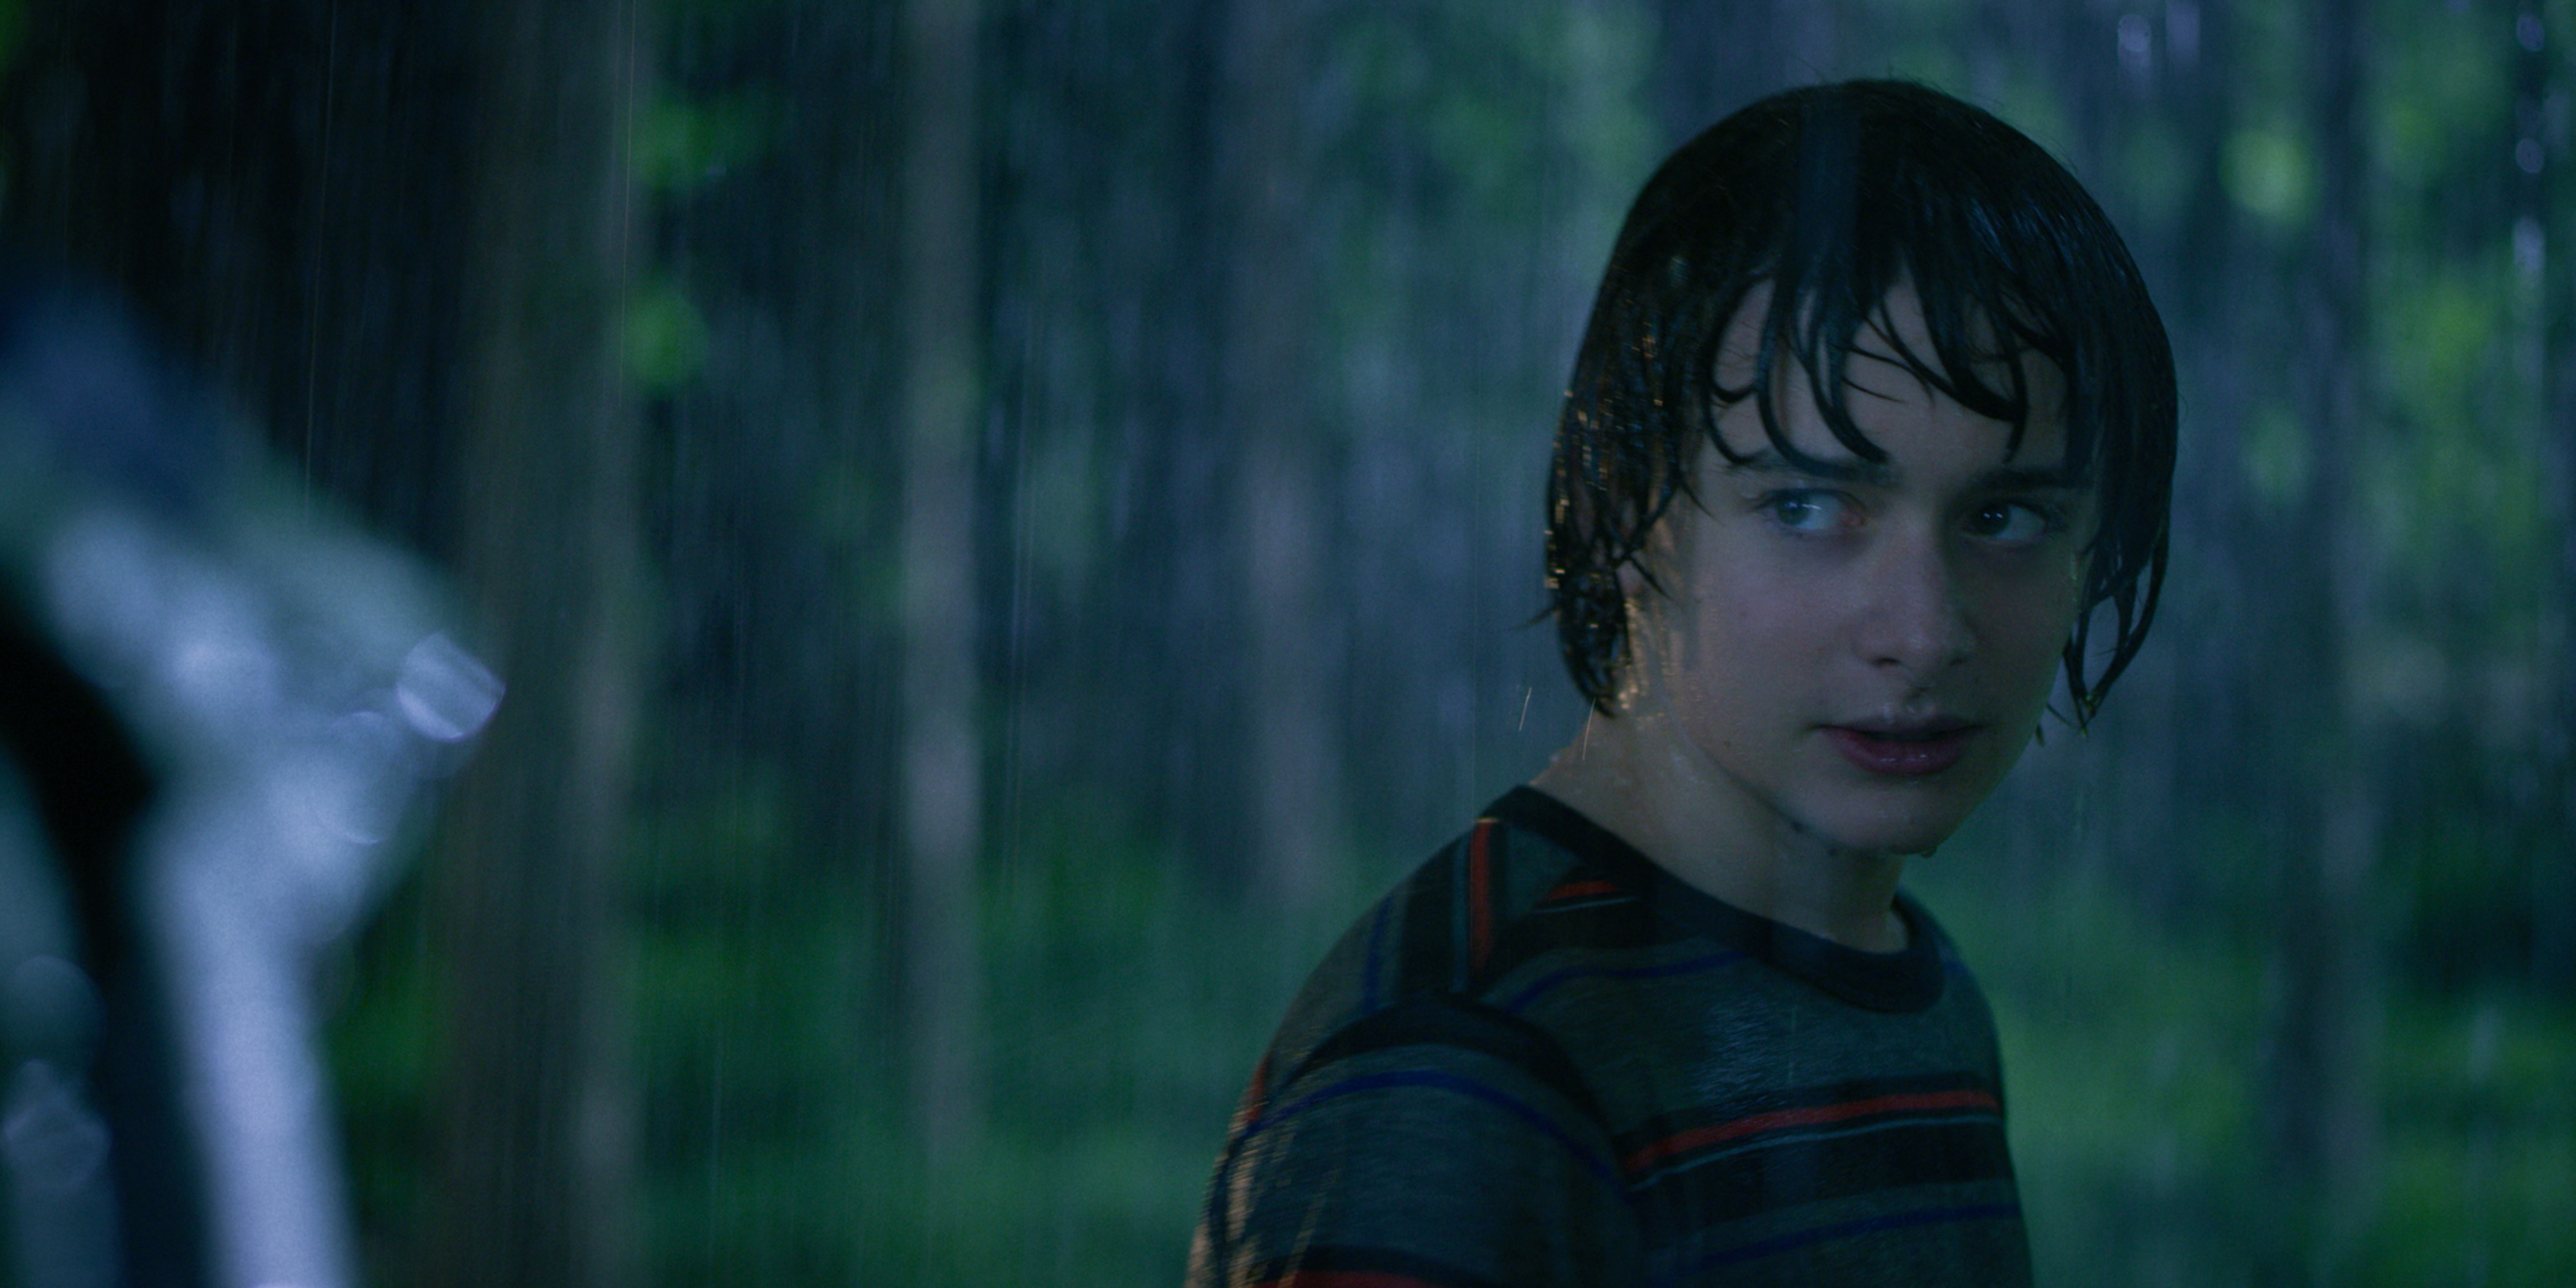 Stranger Things' Will Byers confirmed by actor as gay and in love